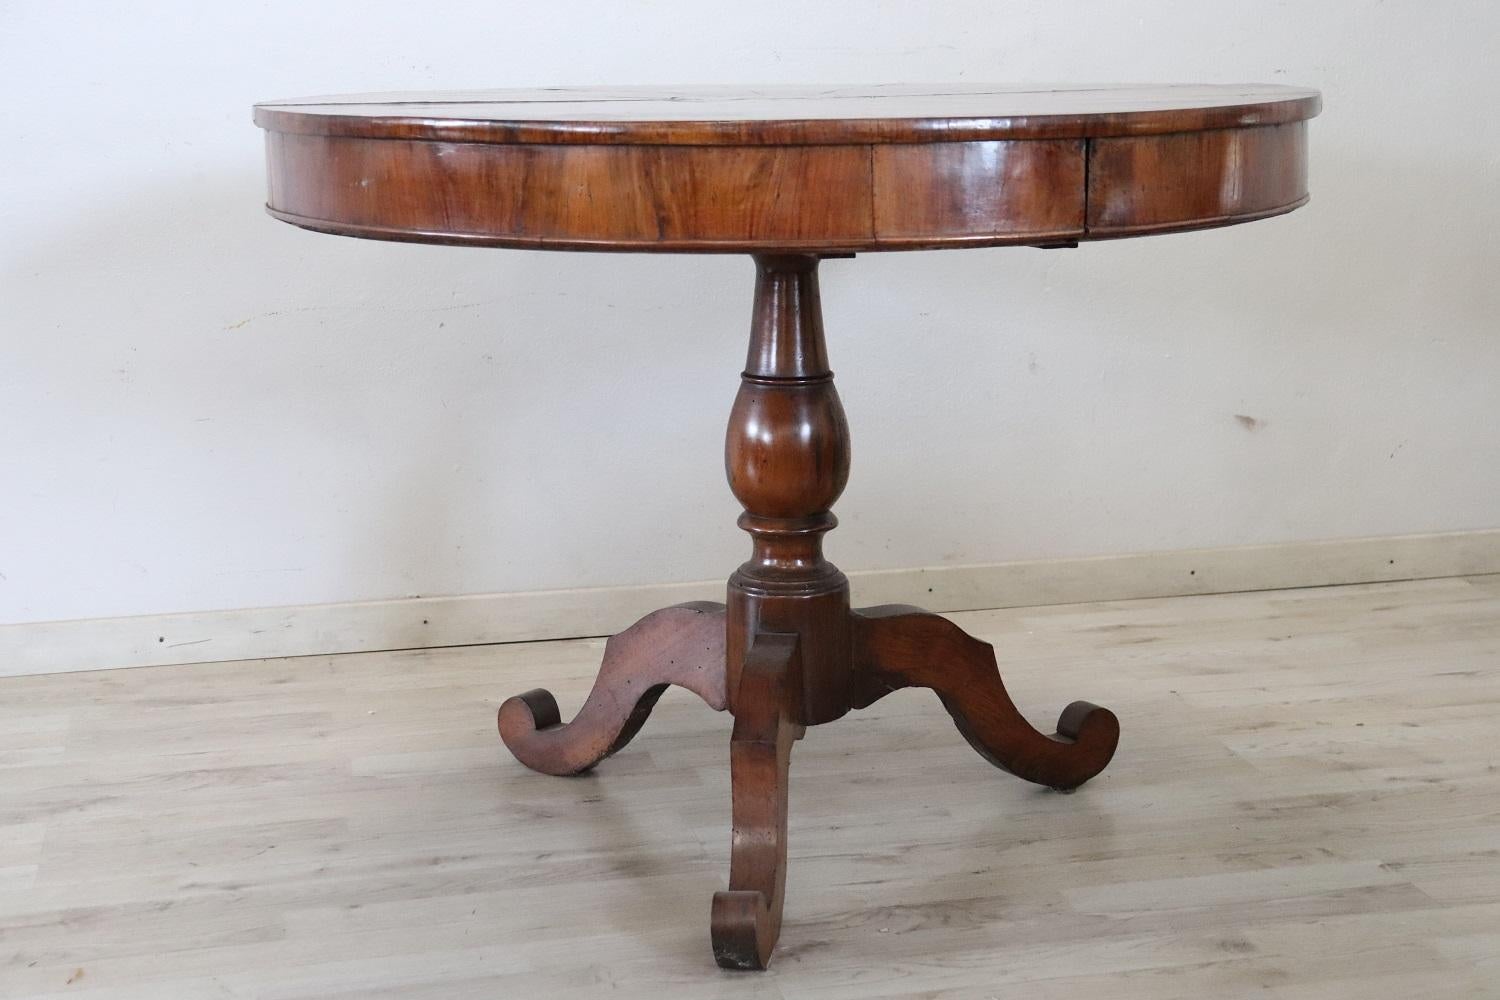 Refined antique Italian round centre table made of walnut wood. Table from the 19th century Louis Philippe period. Featuring an elegant turned central leg. The top has a refined inlaid decoration with a central star. Equipped with a small and